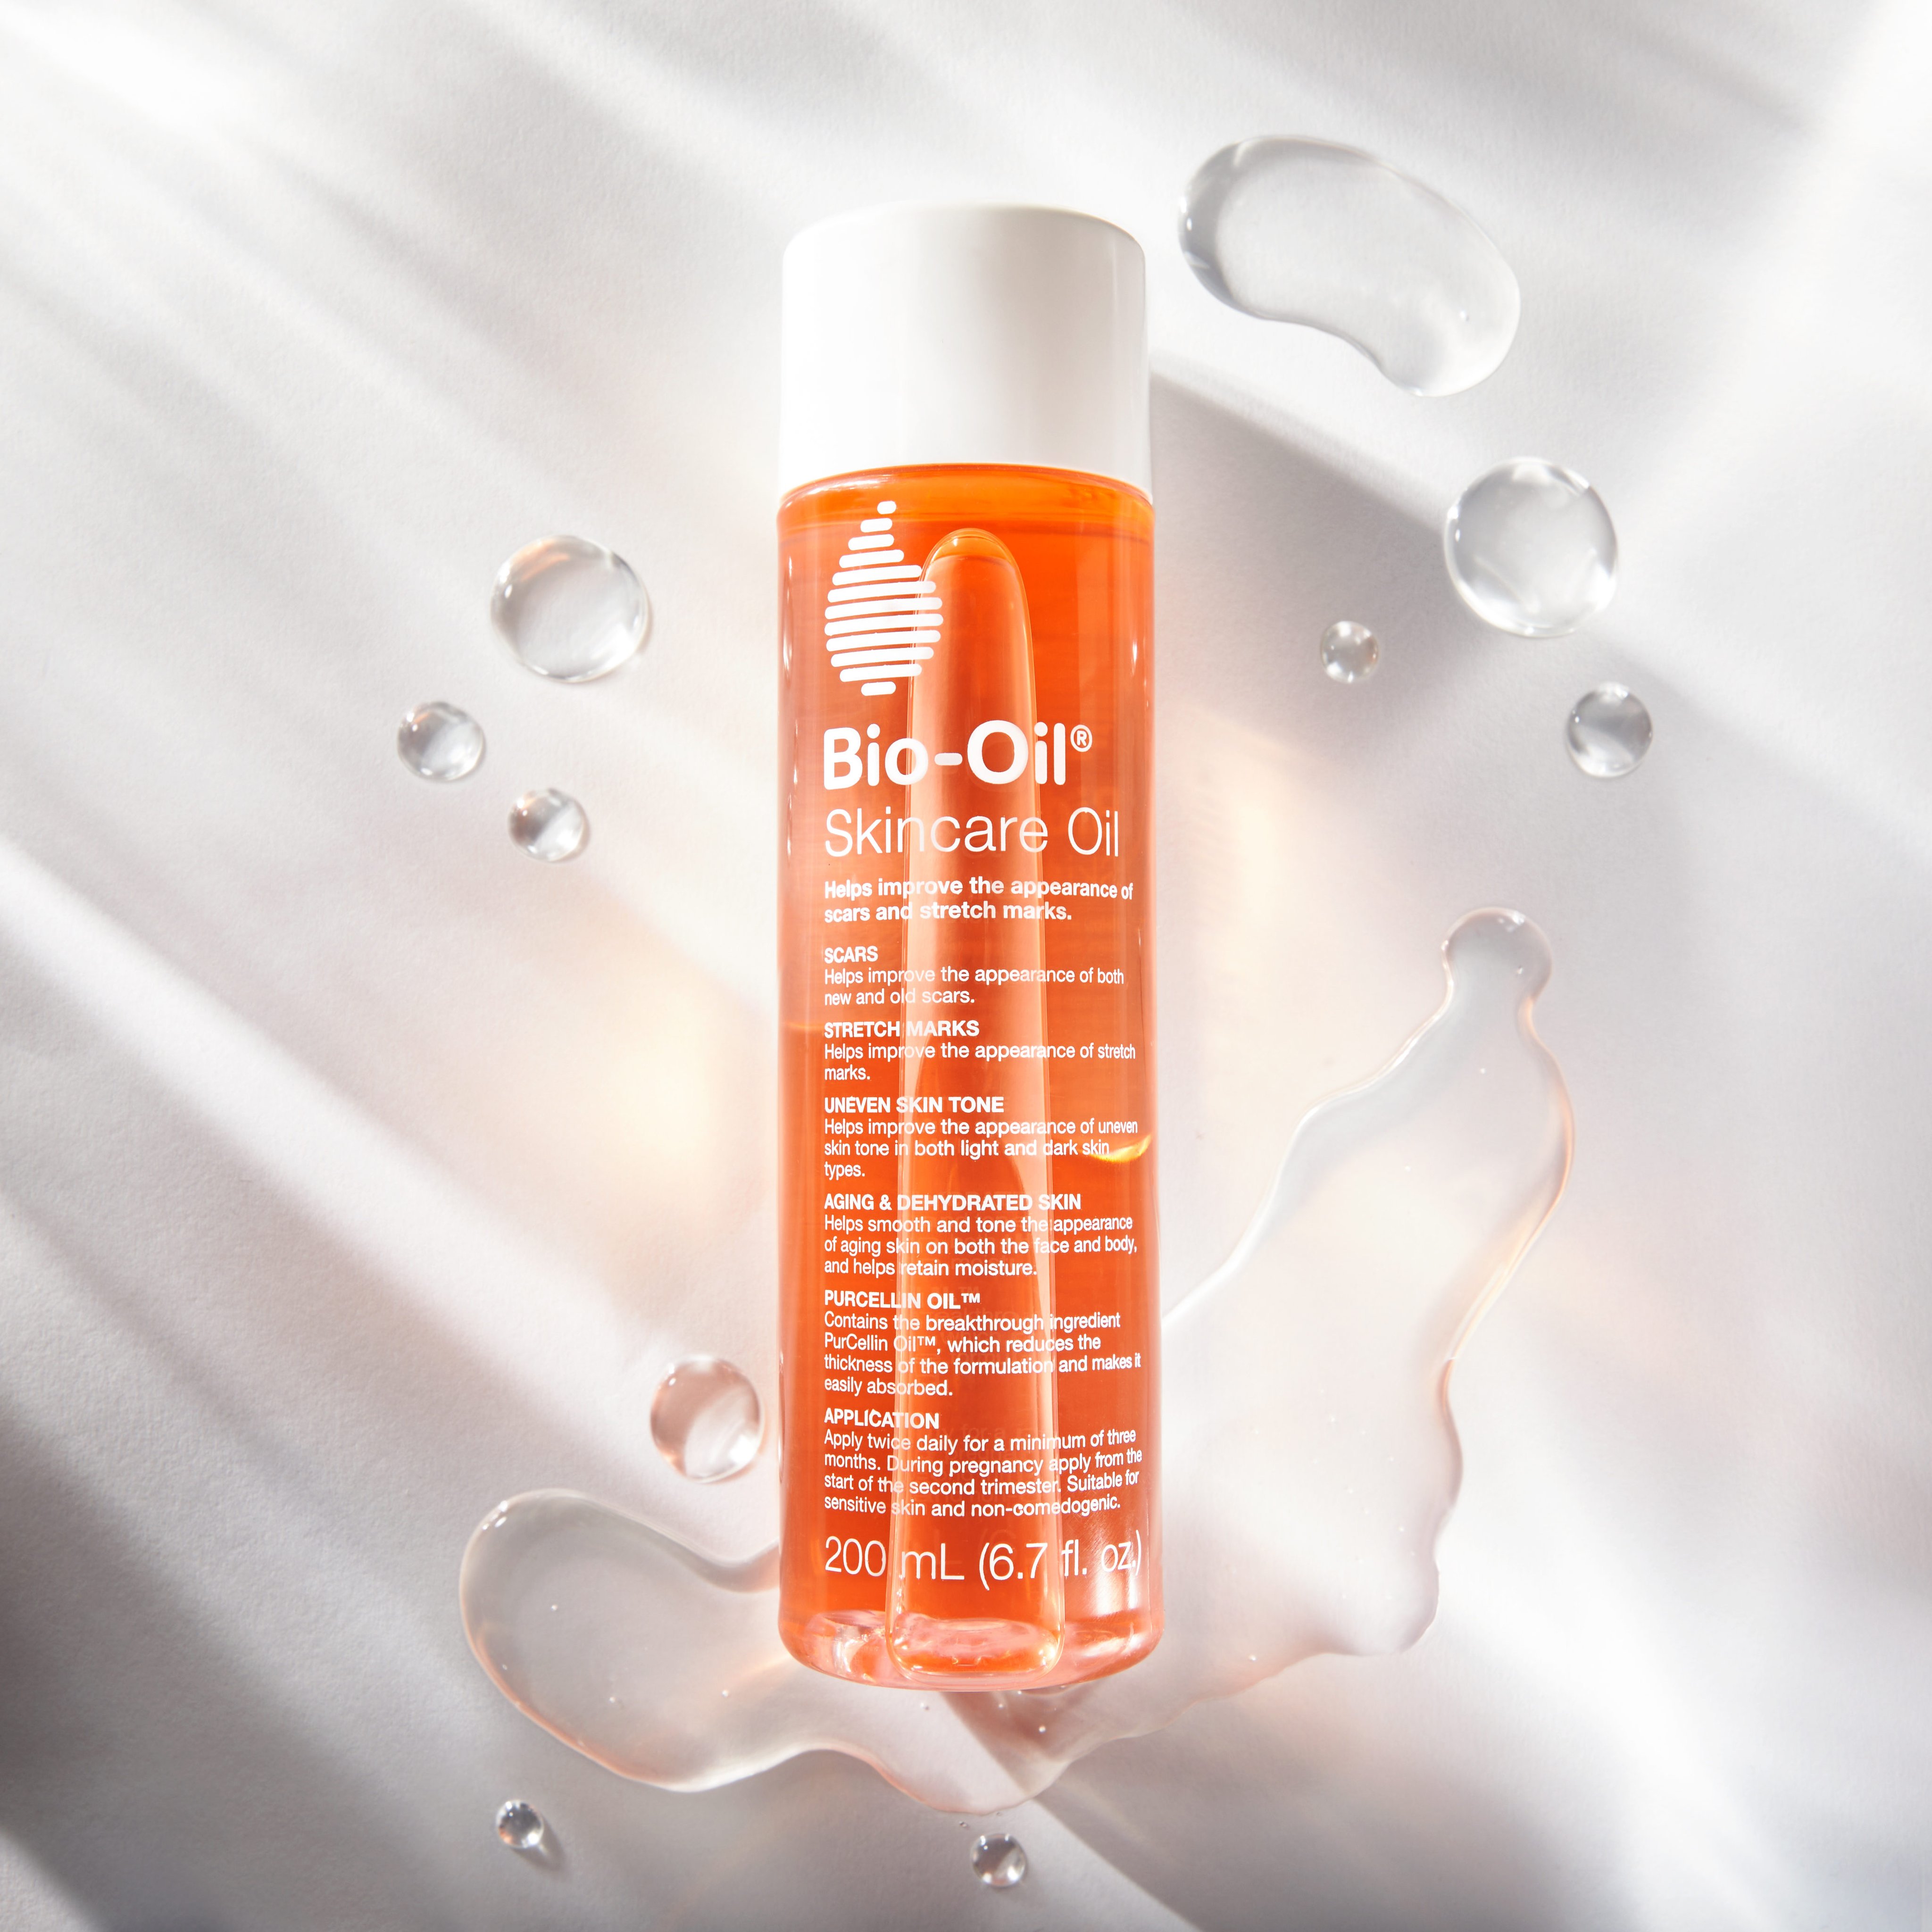 Bio-oil Skincare Oil For Scars And Stretchmarks, Serum Hydrates Skin,  Reduce Appearance Of Scars Calendula- 4.2 Fl Oz : Target